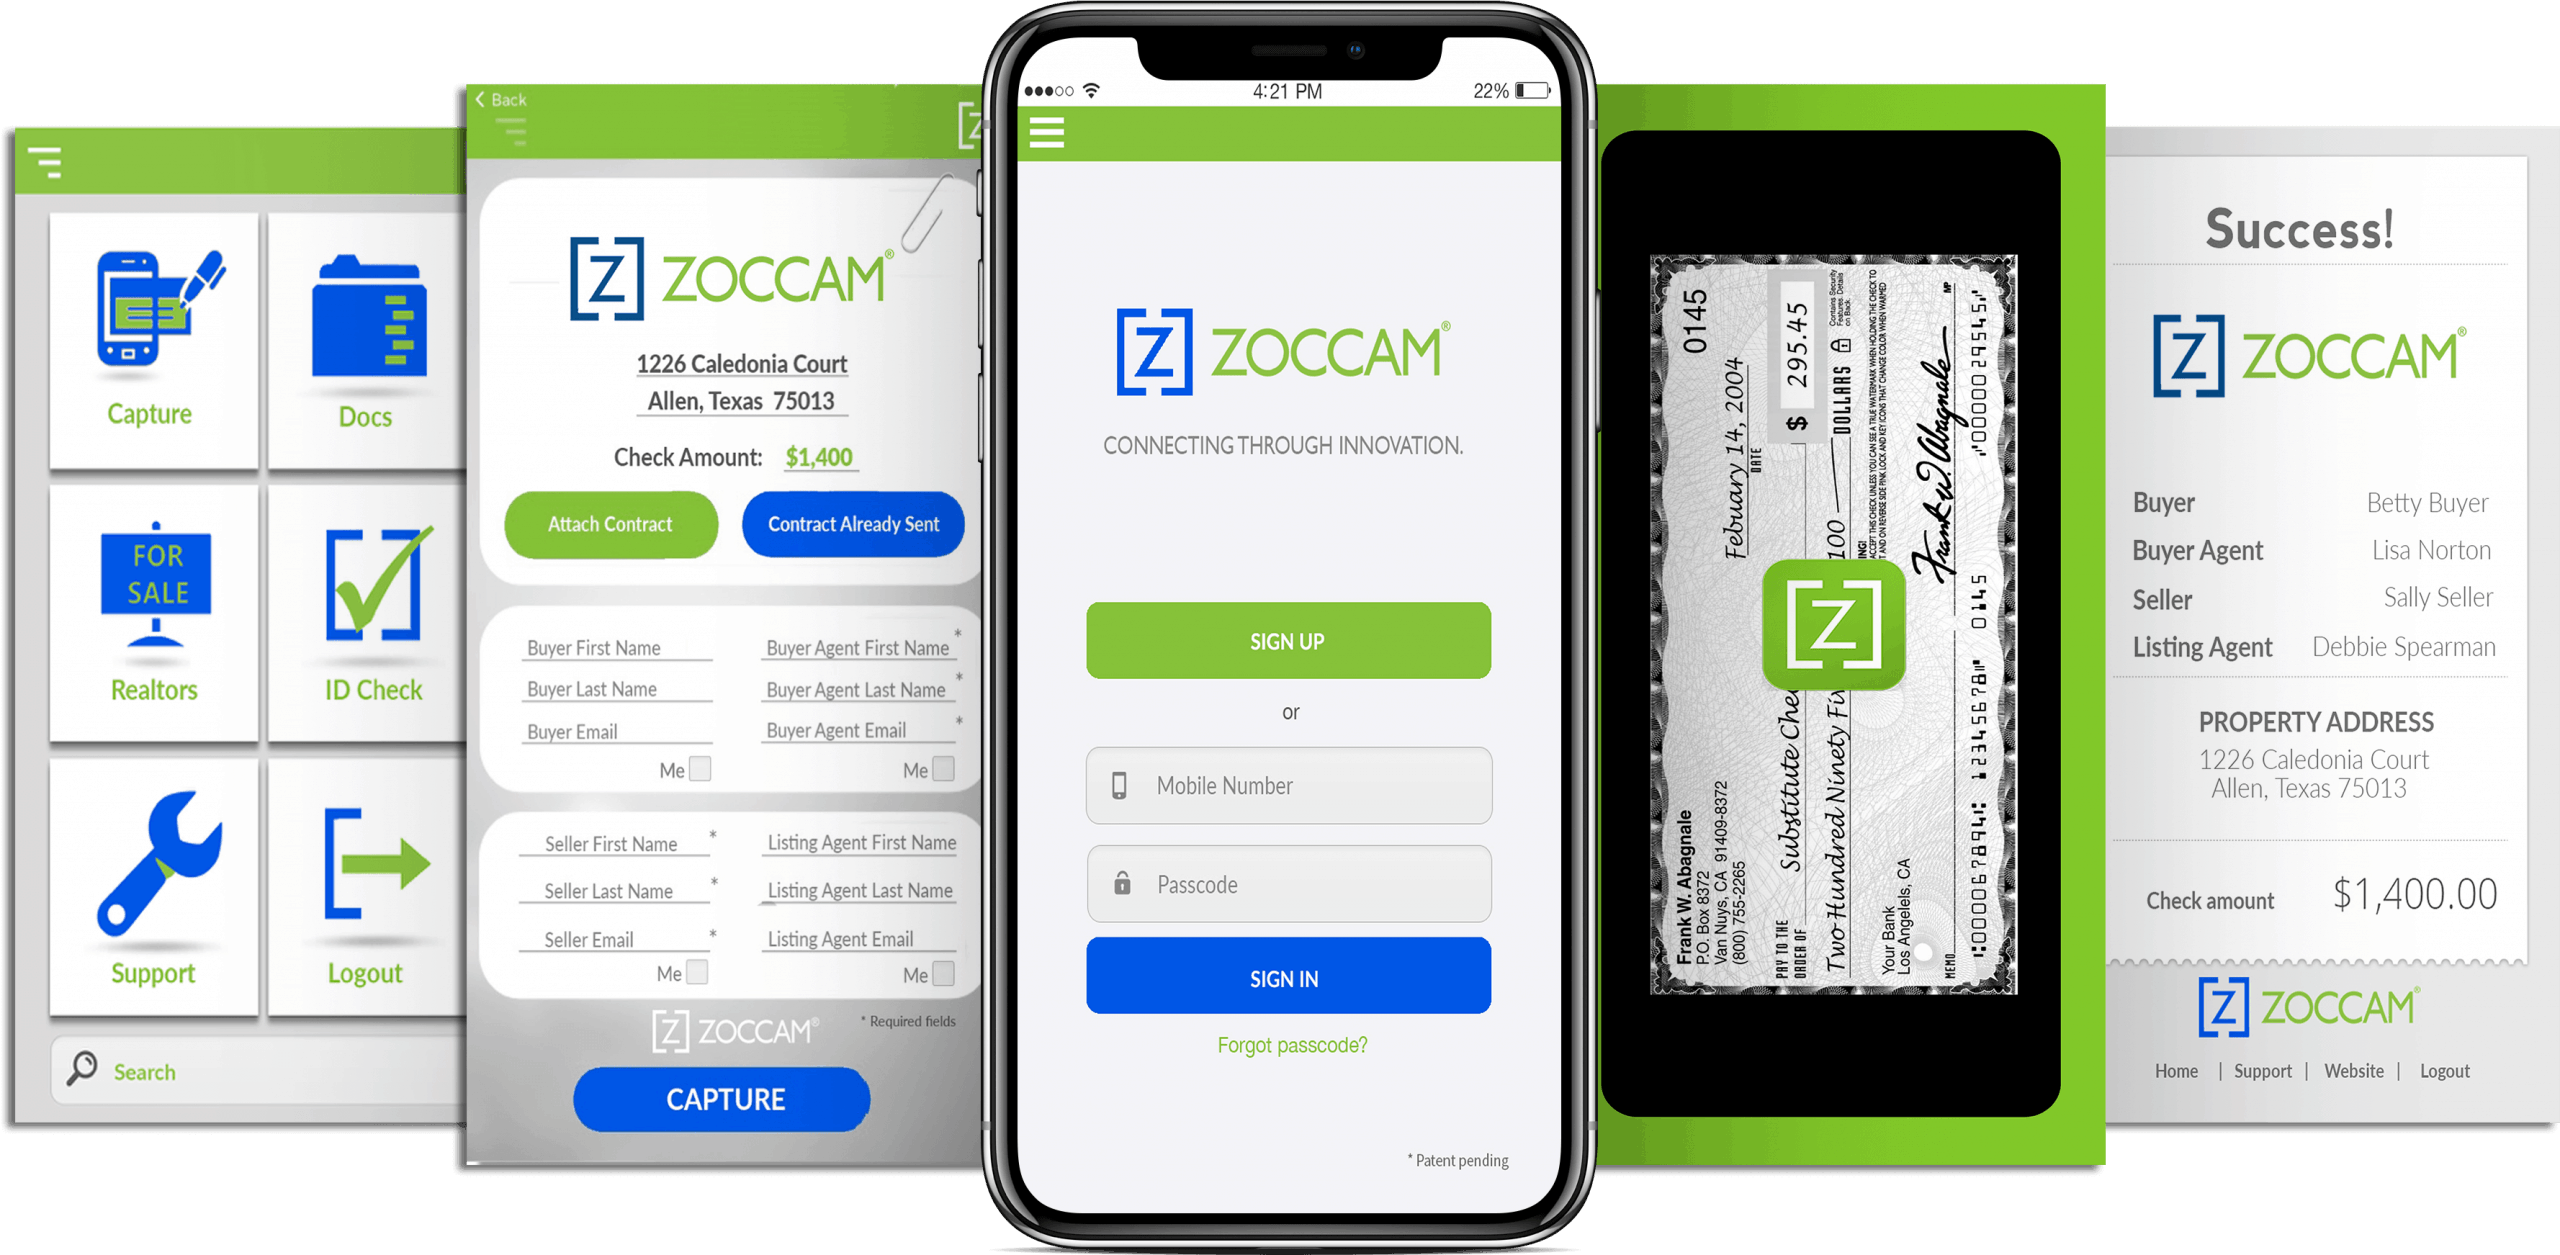 Zoccam on Mobile